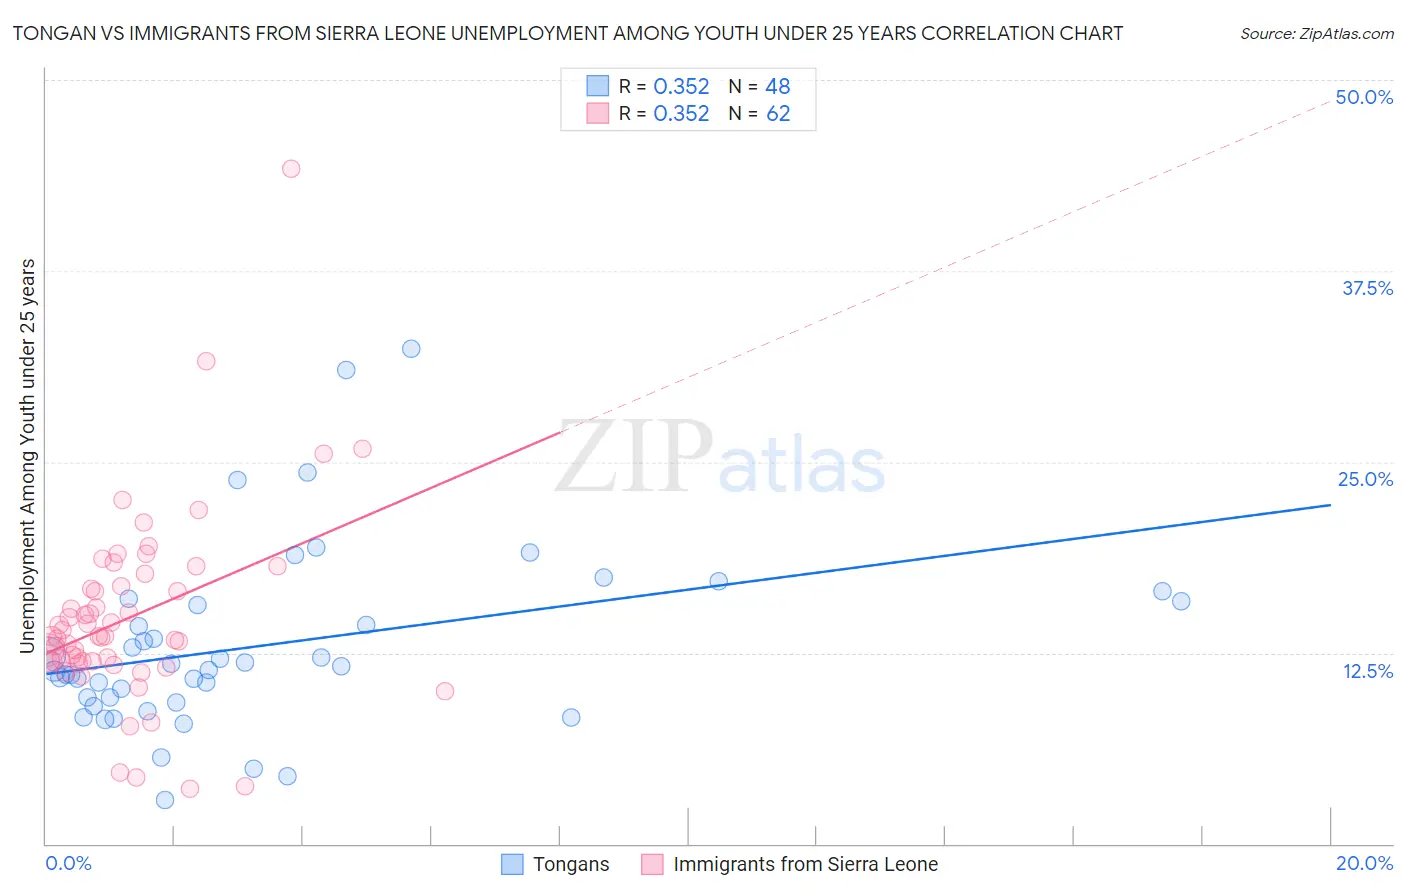 Tongan vs Immigrants from Sierra Leone Unemployment Among Youth under 25 years